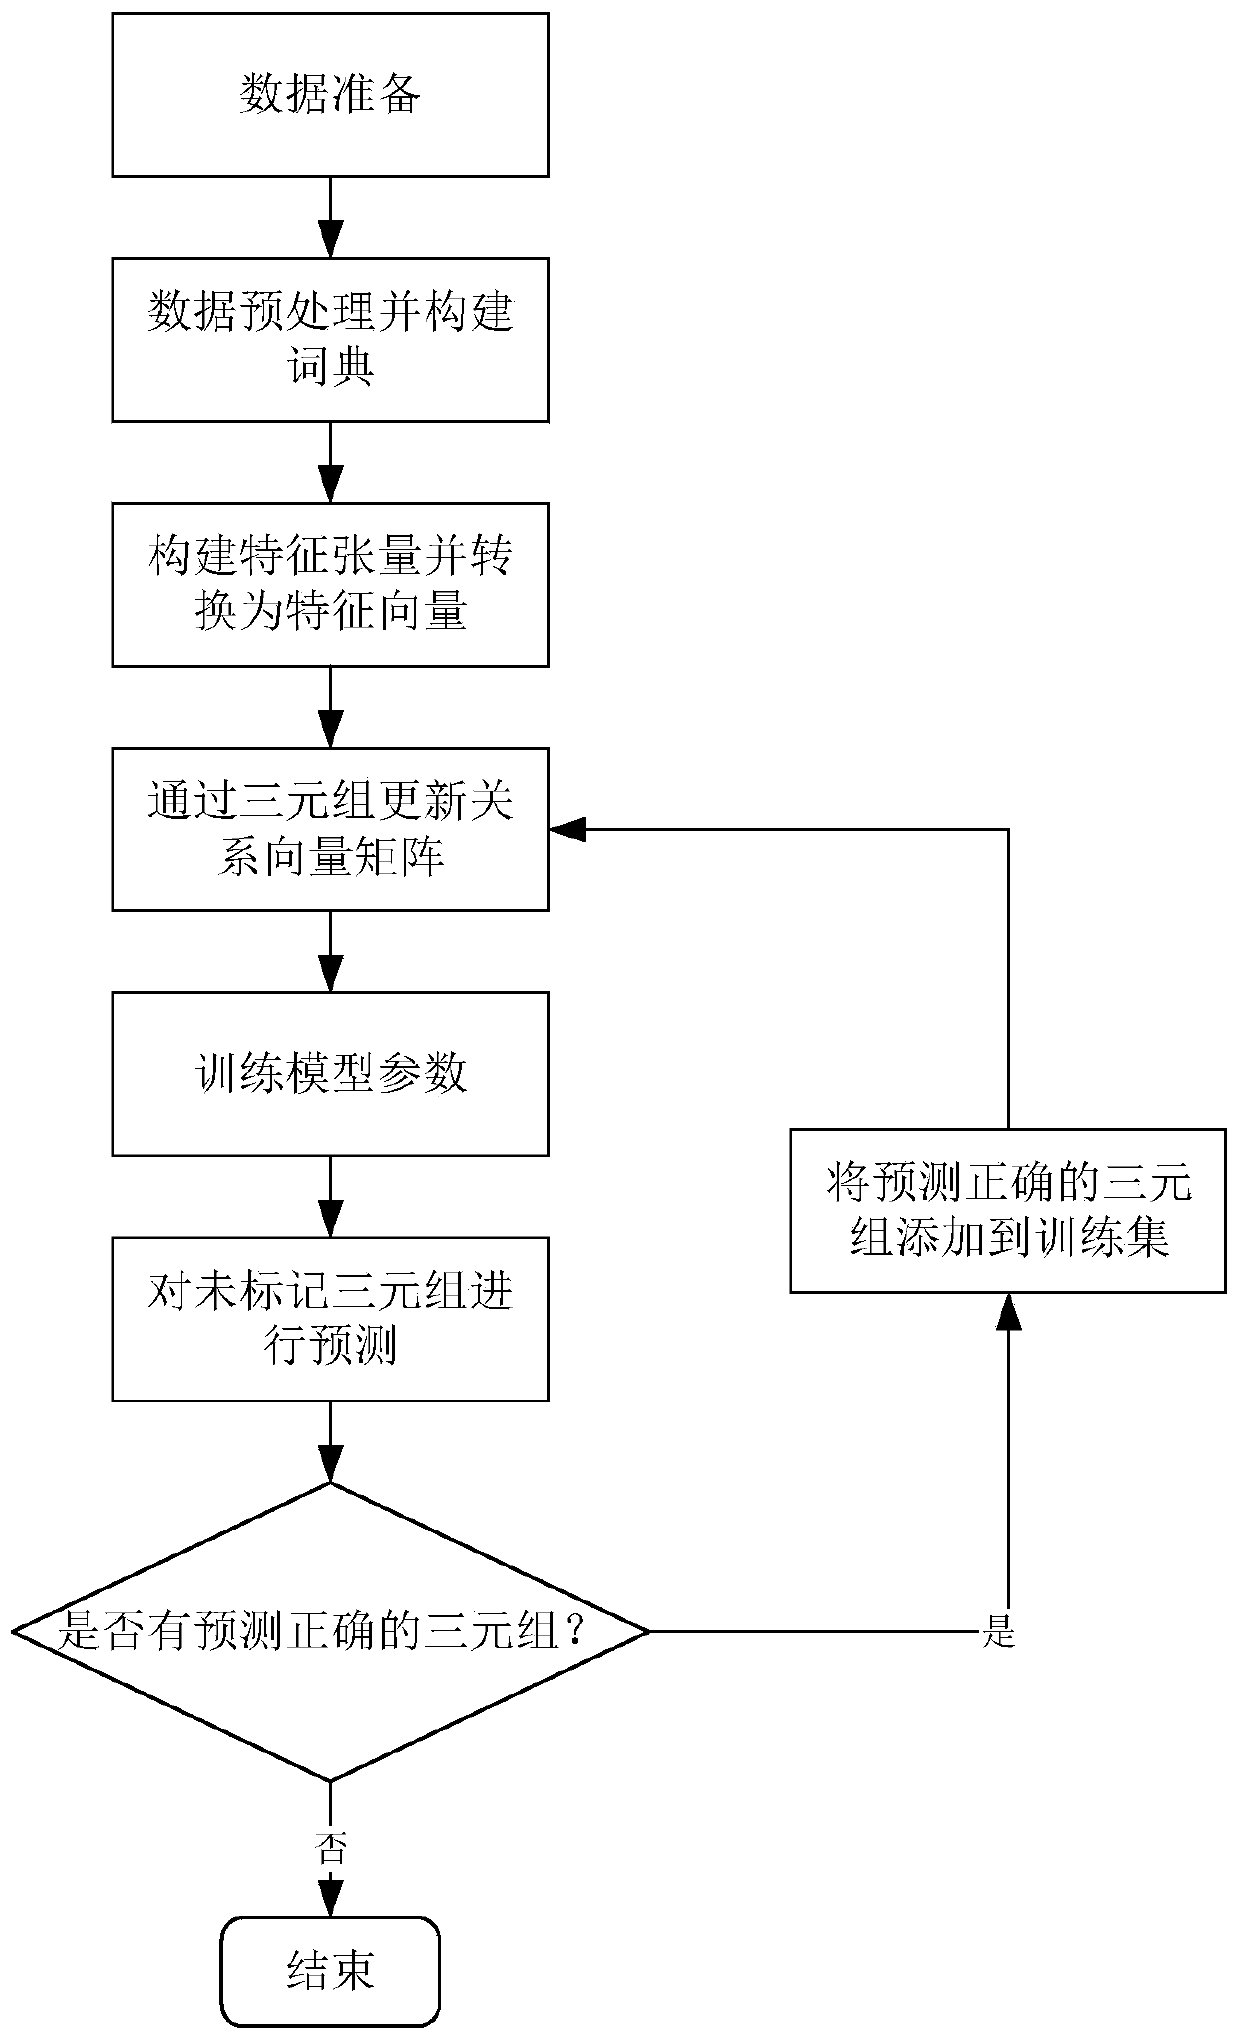 Feature tensor-based Chinese knowledge graph representation learning method